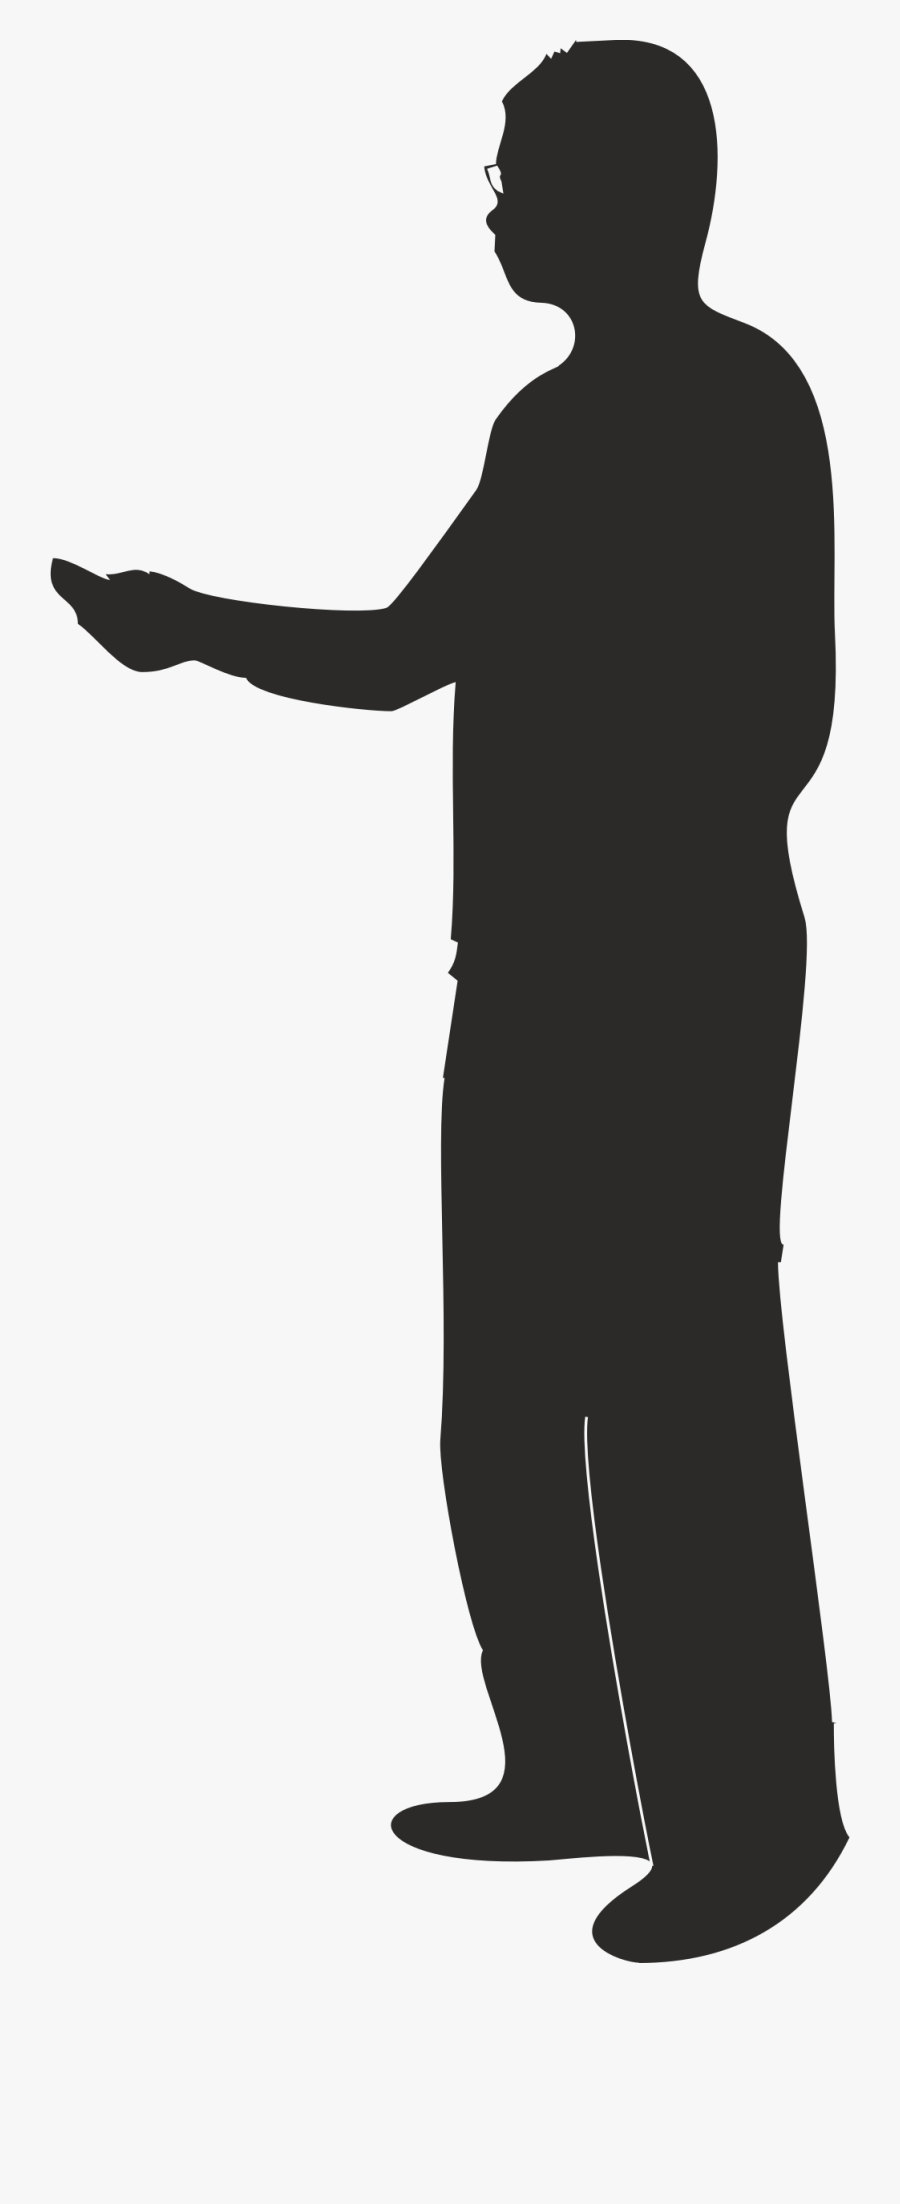 Clipart - Silhouette Person Pointing Png, Transparent Clipart